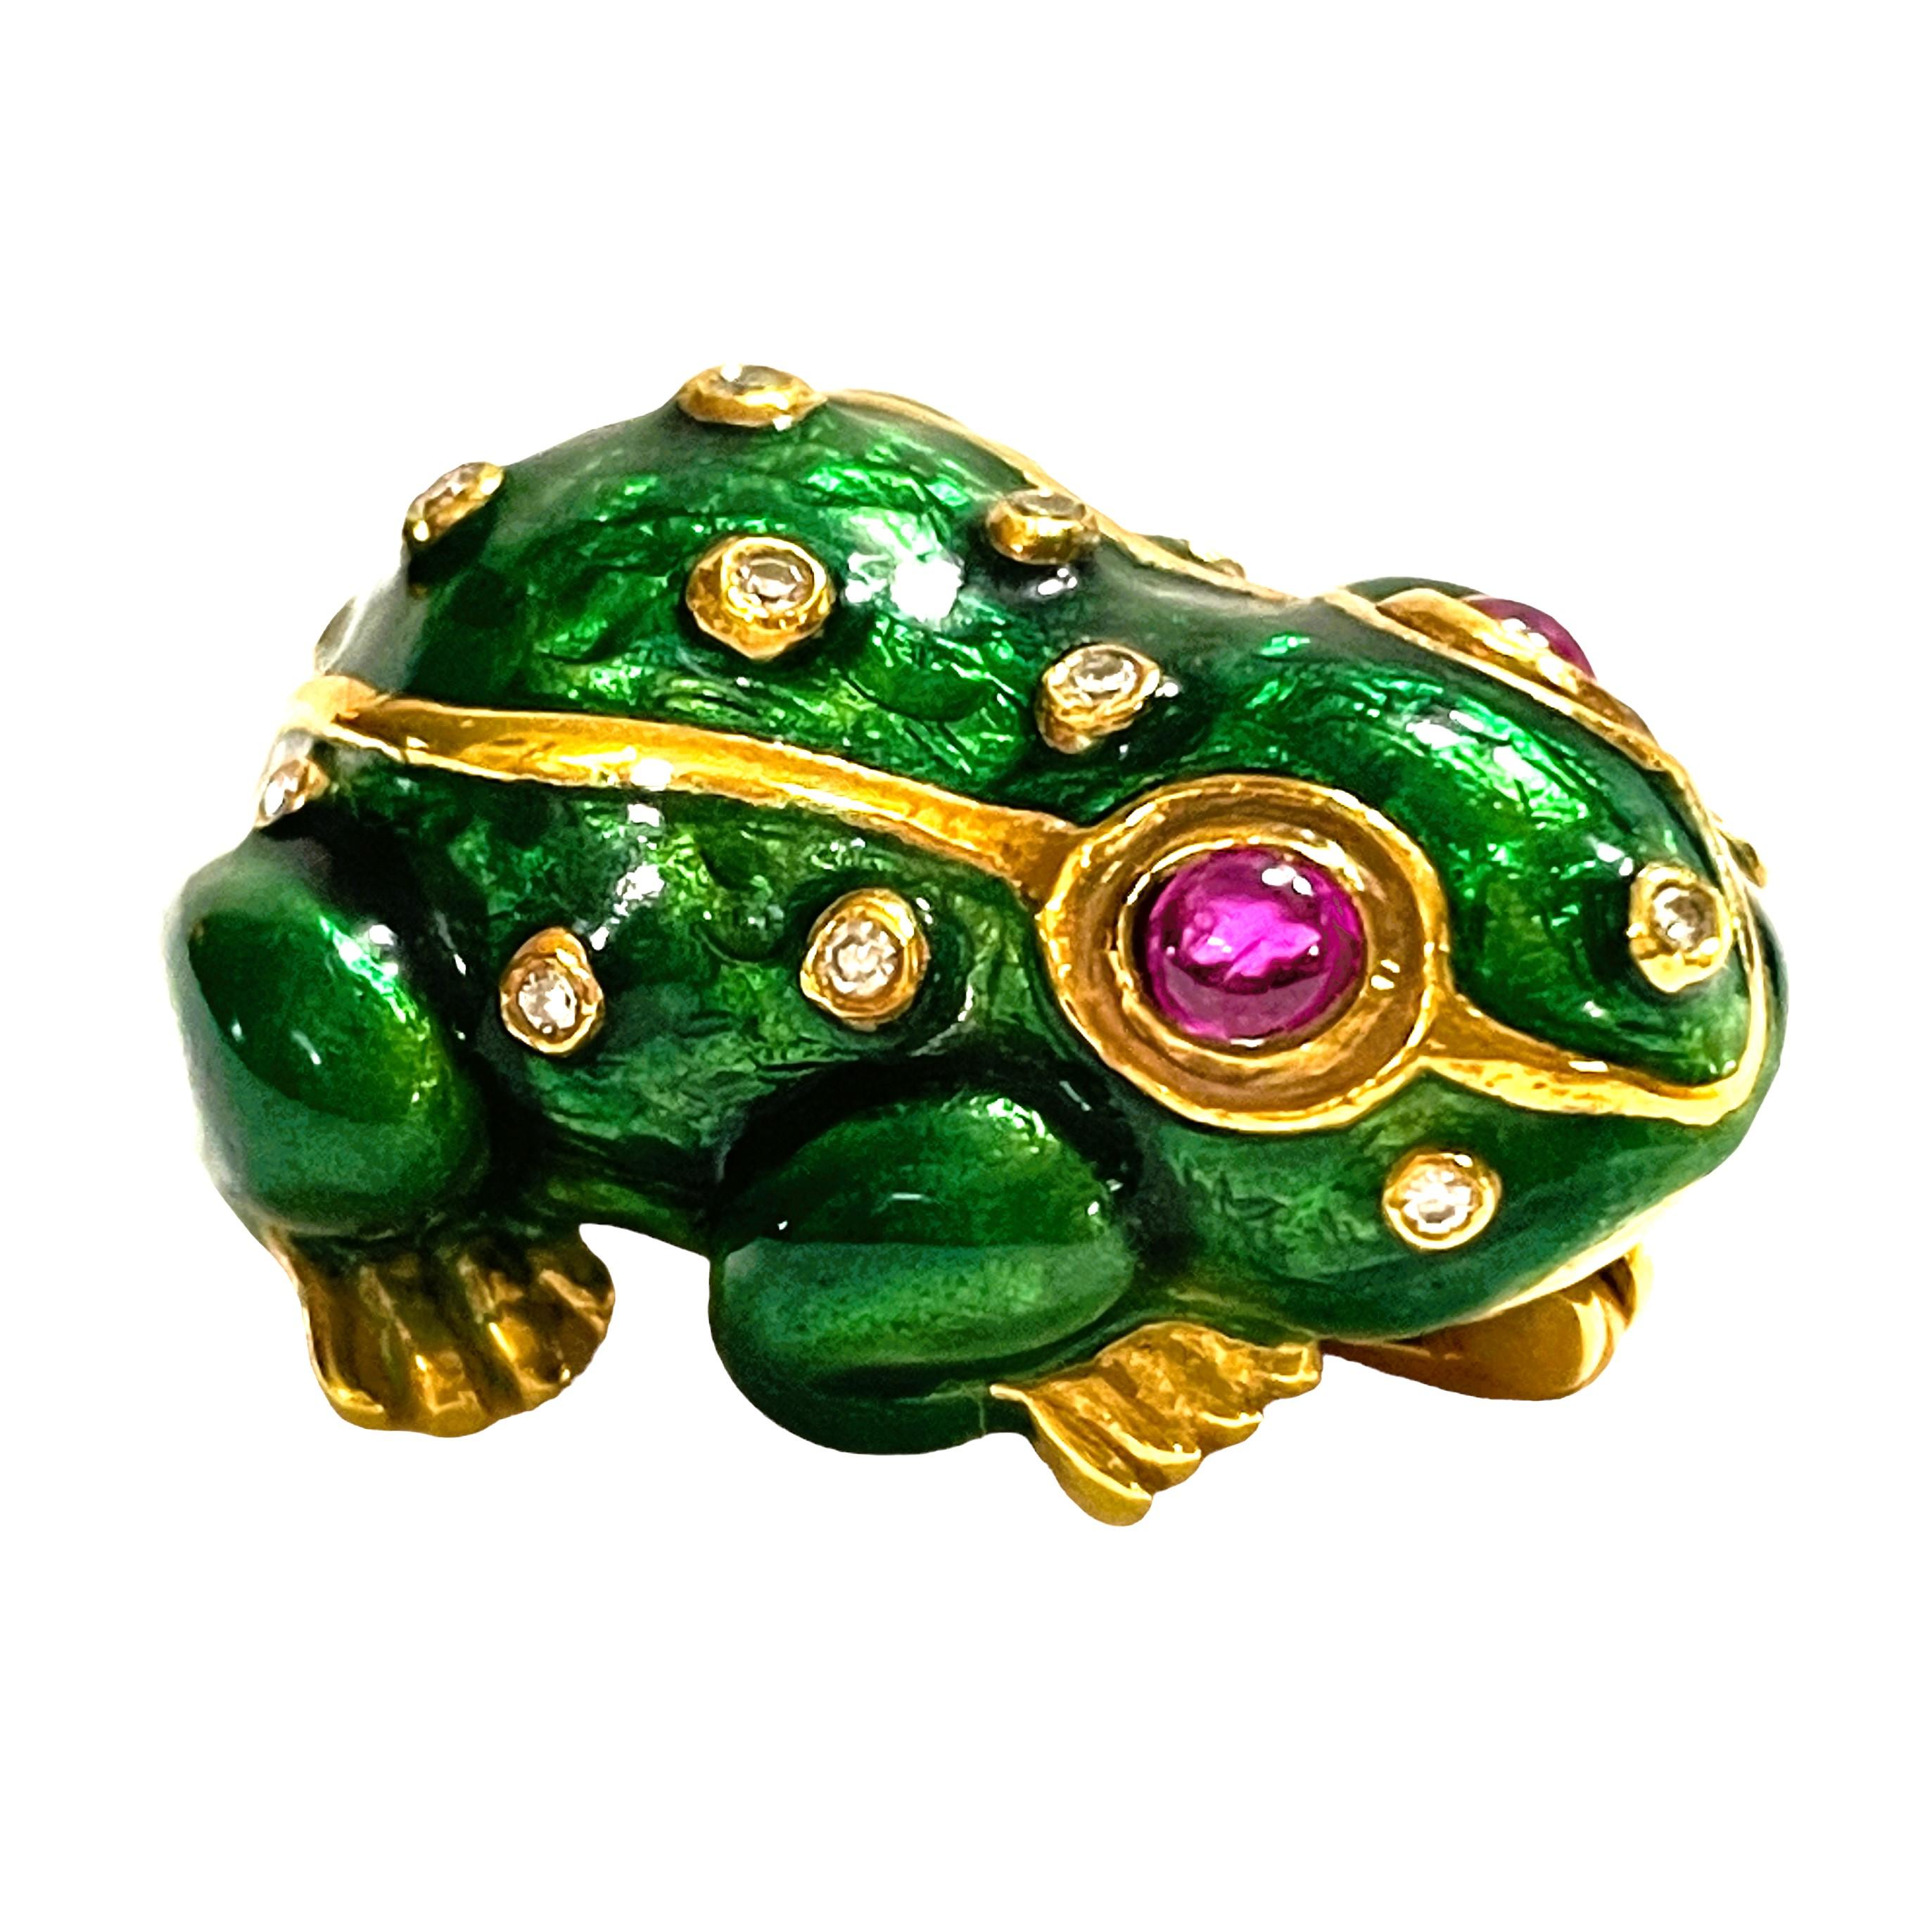 Art Deco Handmade 21k Yellow Gold Enamel Frog Pin/Pedant with Ruby Eyes and Diamond Bumps